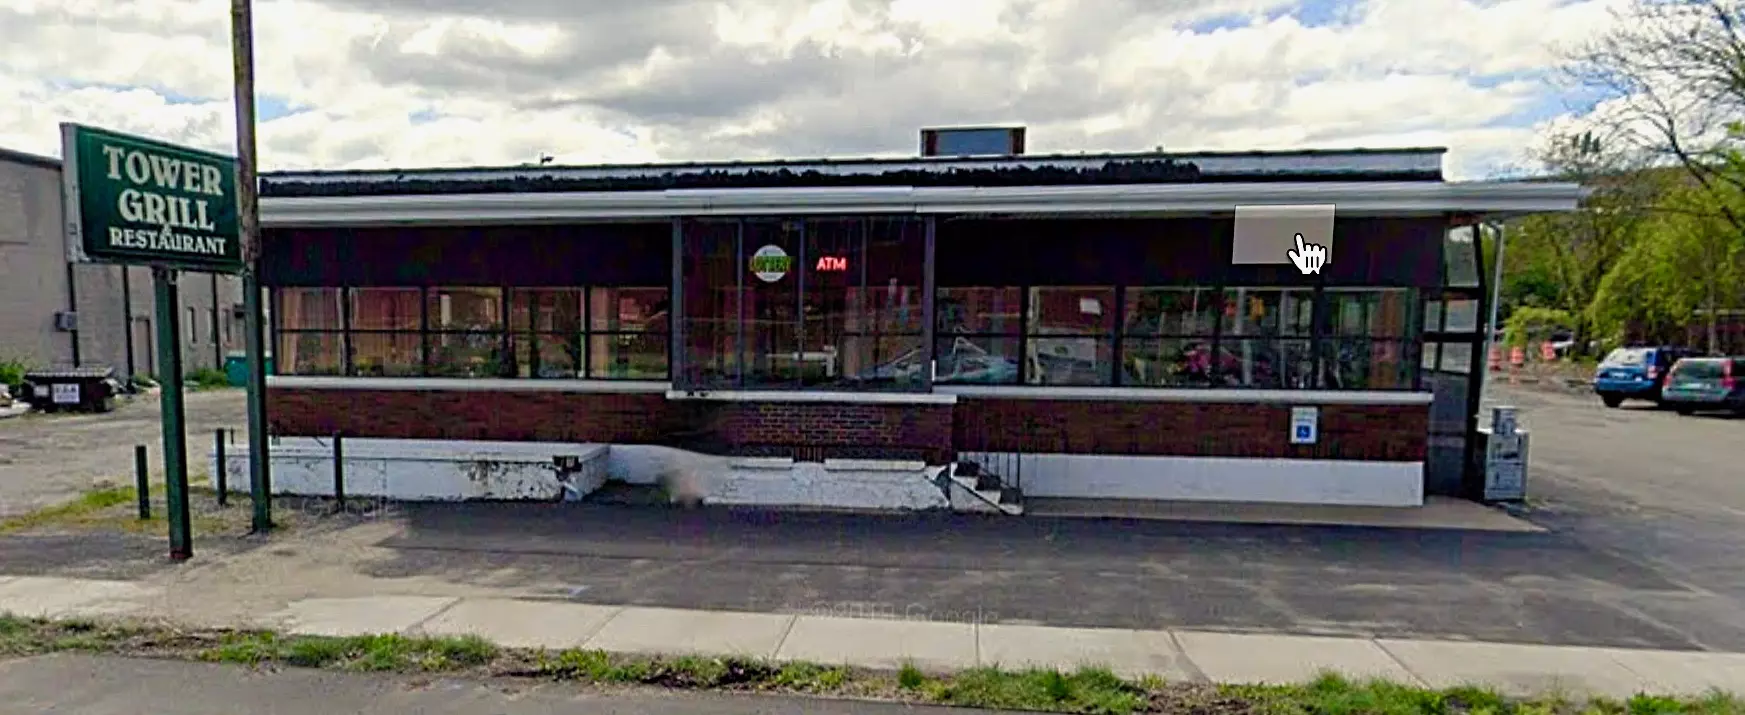 Waterbury's Legendary Tower Grill Diner Is Going Out of Business